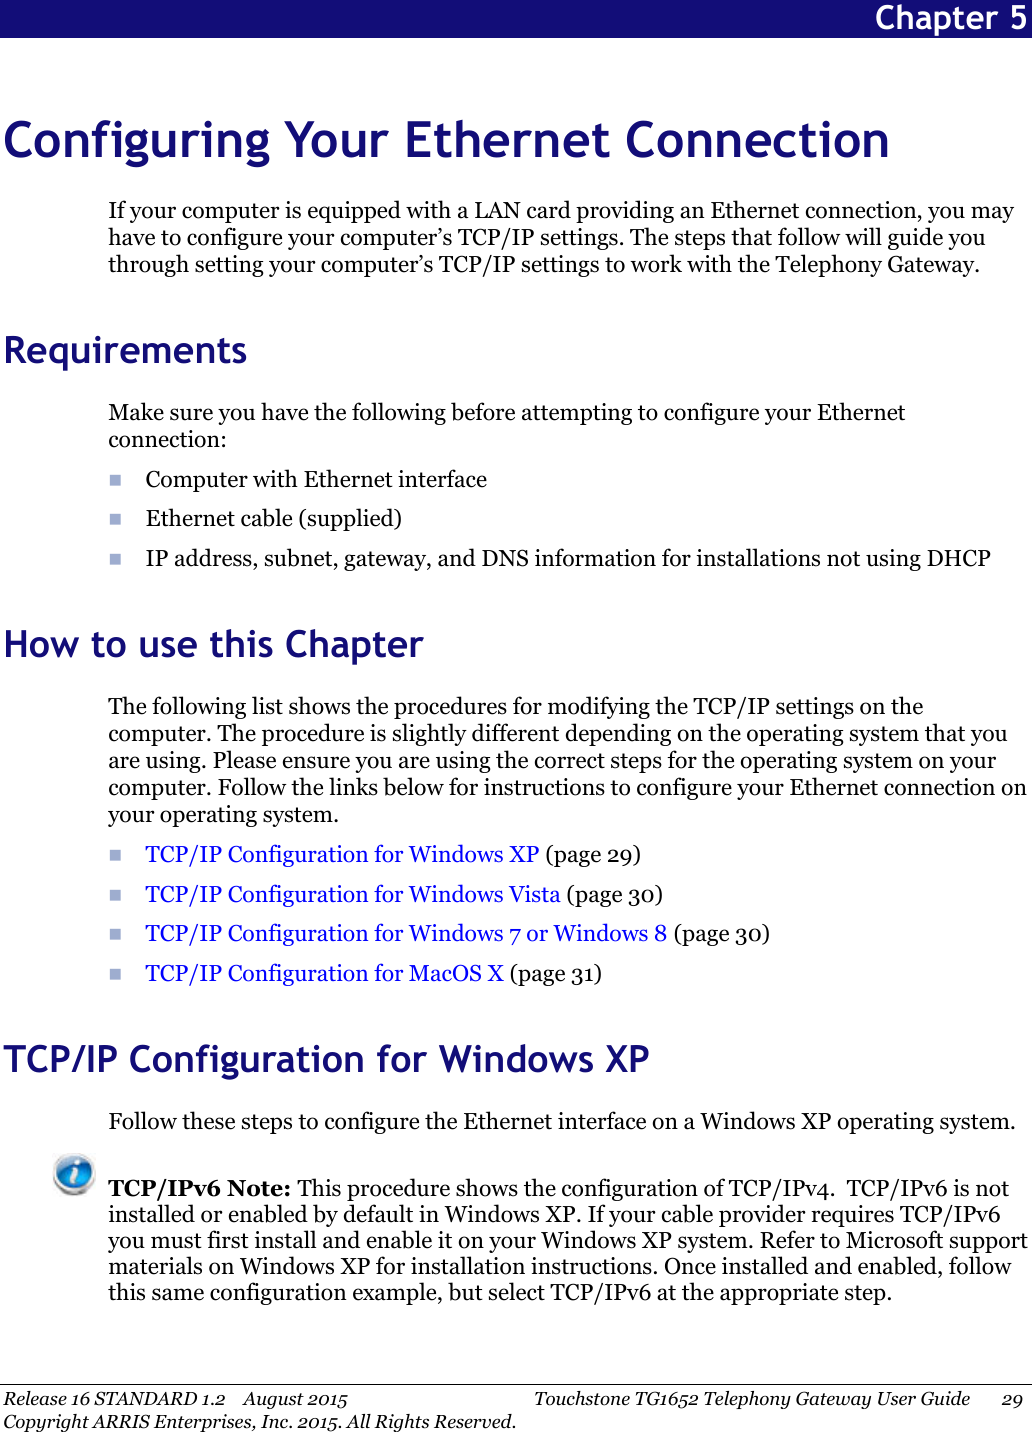 Release 16 STANDARD 1.2 August 2015 Touchstone TG1652 Telephony Gateway User Guide 29Copyright ARRIS Enterprises, Inc. 2015. All Rights Reserved.Chapter 5Configuring Your Ethernet ConnectionIf your computer is equipped with a LAN card providing an Ethernet connection, you mayhave to configure your computer’s TCP/IP settings. The steps that follow will guide youthrough setting your computer’s TCP/IP settings to work with the Telephony Gateway.RequirementsMake sure you have the following before attempting to configure your Ethernetconnection:Computer with Ethernet interfaceEthernet cable (supplied)IP address, subnet, gateway, and DNS information for installations not using DHCPHow to use this ChapterThe following list shows the procedures for modifying the TCP/IP settings on thecomputer. The procedure is slightly different depending on the operating system that youare using. Please ensure you are using the correct steps for the operating system on yourcomputer. Follow the links below for instructions to configure your Ethernet connection onyour operating system.TCP/IP Configuration for Windows XP (page 29)TCP/IP Configuration for Windows Vista (page 30)TCP/IP Configuration for Windows 7 or Windows 8 (page 30)TCP/IP Configuration for MacOS X (page 31)TCP/IP Configuration for Windows XPFollow these steps to configure the Ethernet interface on a Windows XP operating system.TCP/IPv6 Note: This procedure shows the configuration of TCP/IPv4. TCP/IPv6 is notinstalled or enabled by default in Windows XP. If your cable provider requires TCP/IPv6you must first install and enable it on your Windows XP system. Refer to Microsoft supportmaterials on Windows XP for installation instructions. Once installed and enabled, followthis same configuration example, but select TCP/IPv6 at the appropriate step.